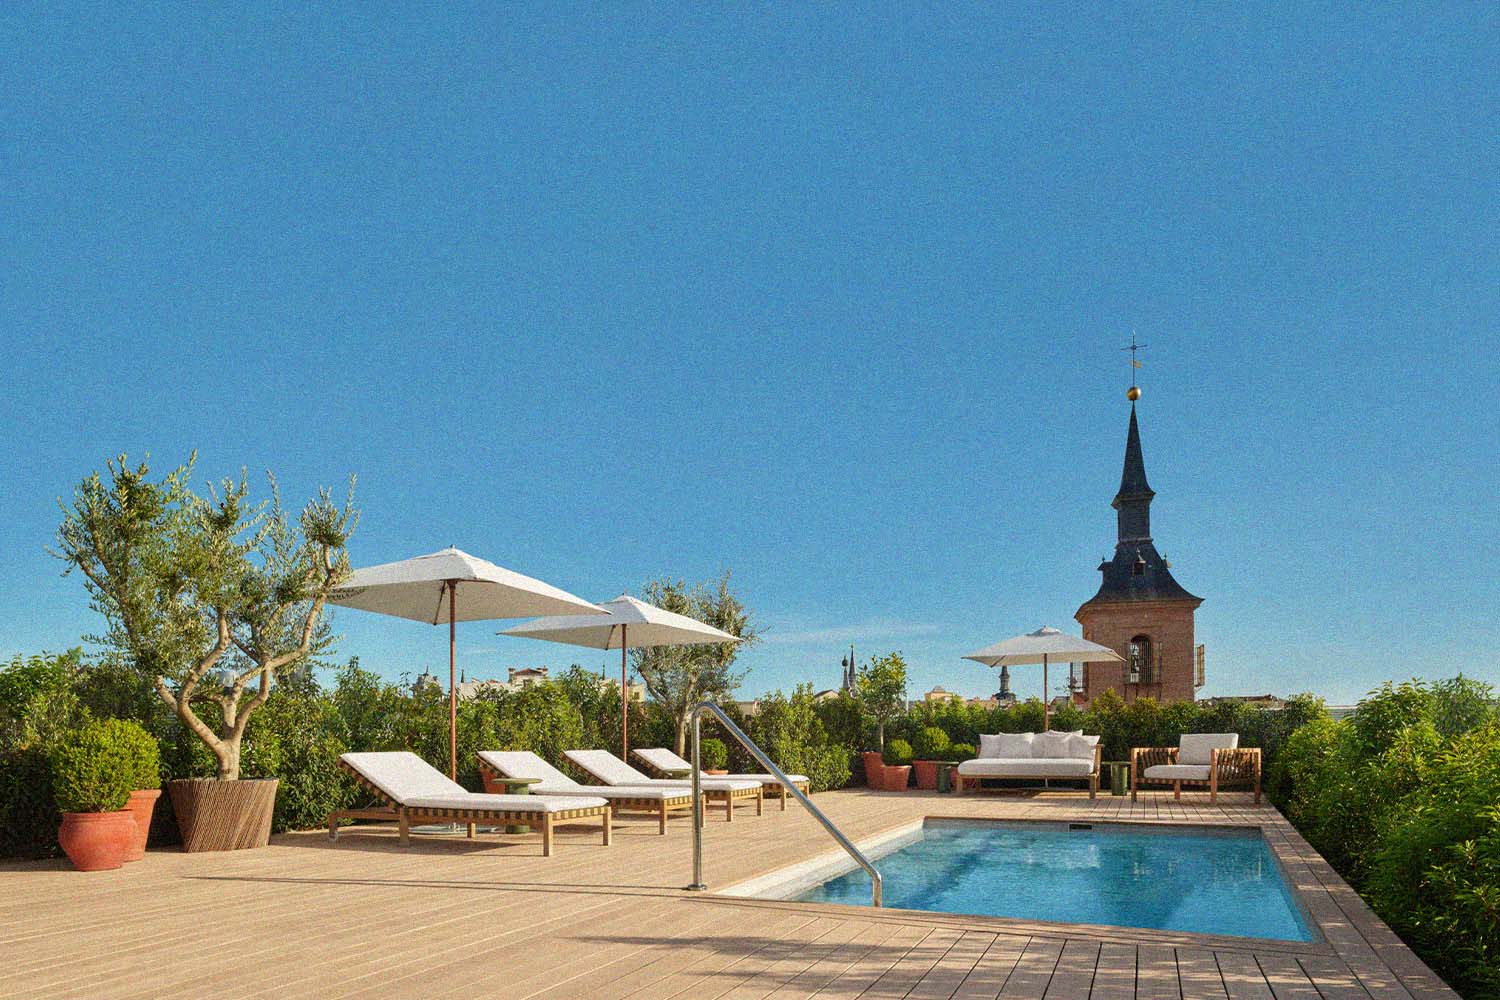 The rooftop pool at The Madrid EDITION